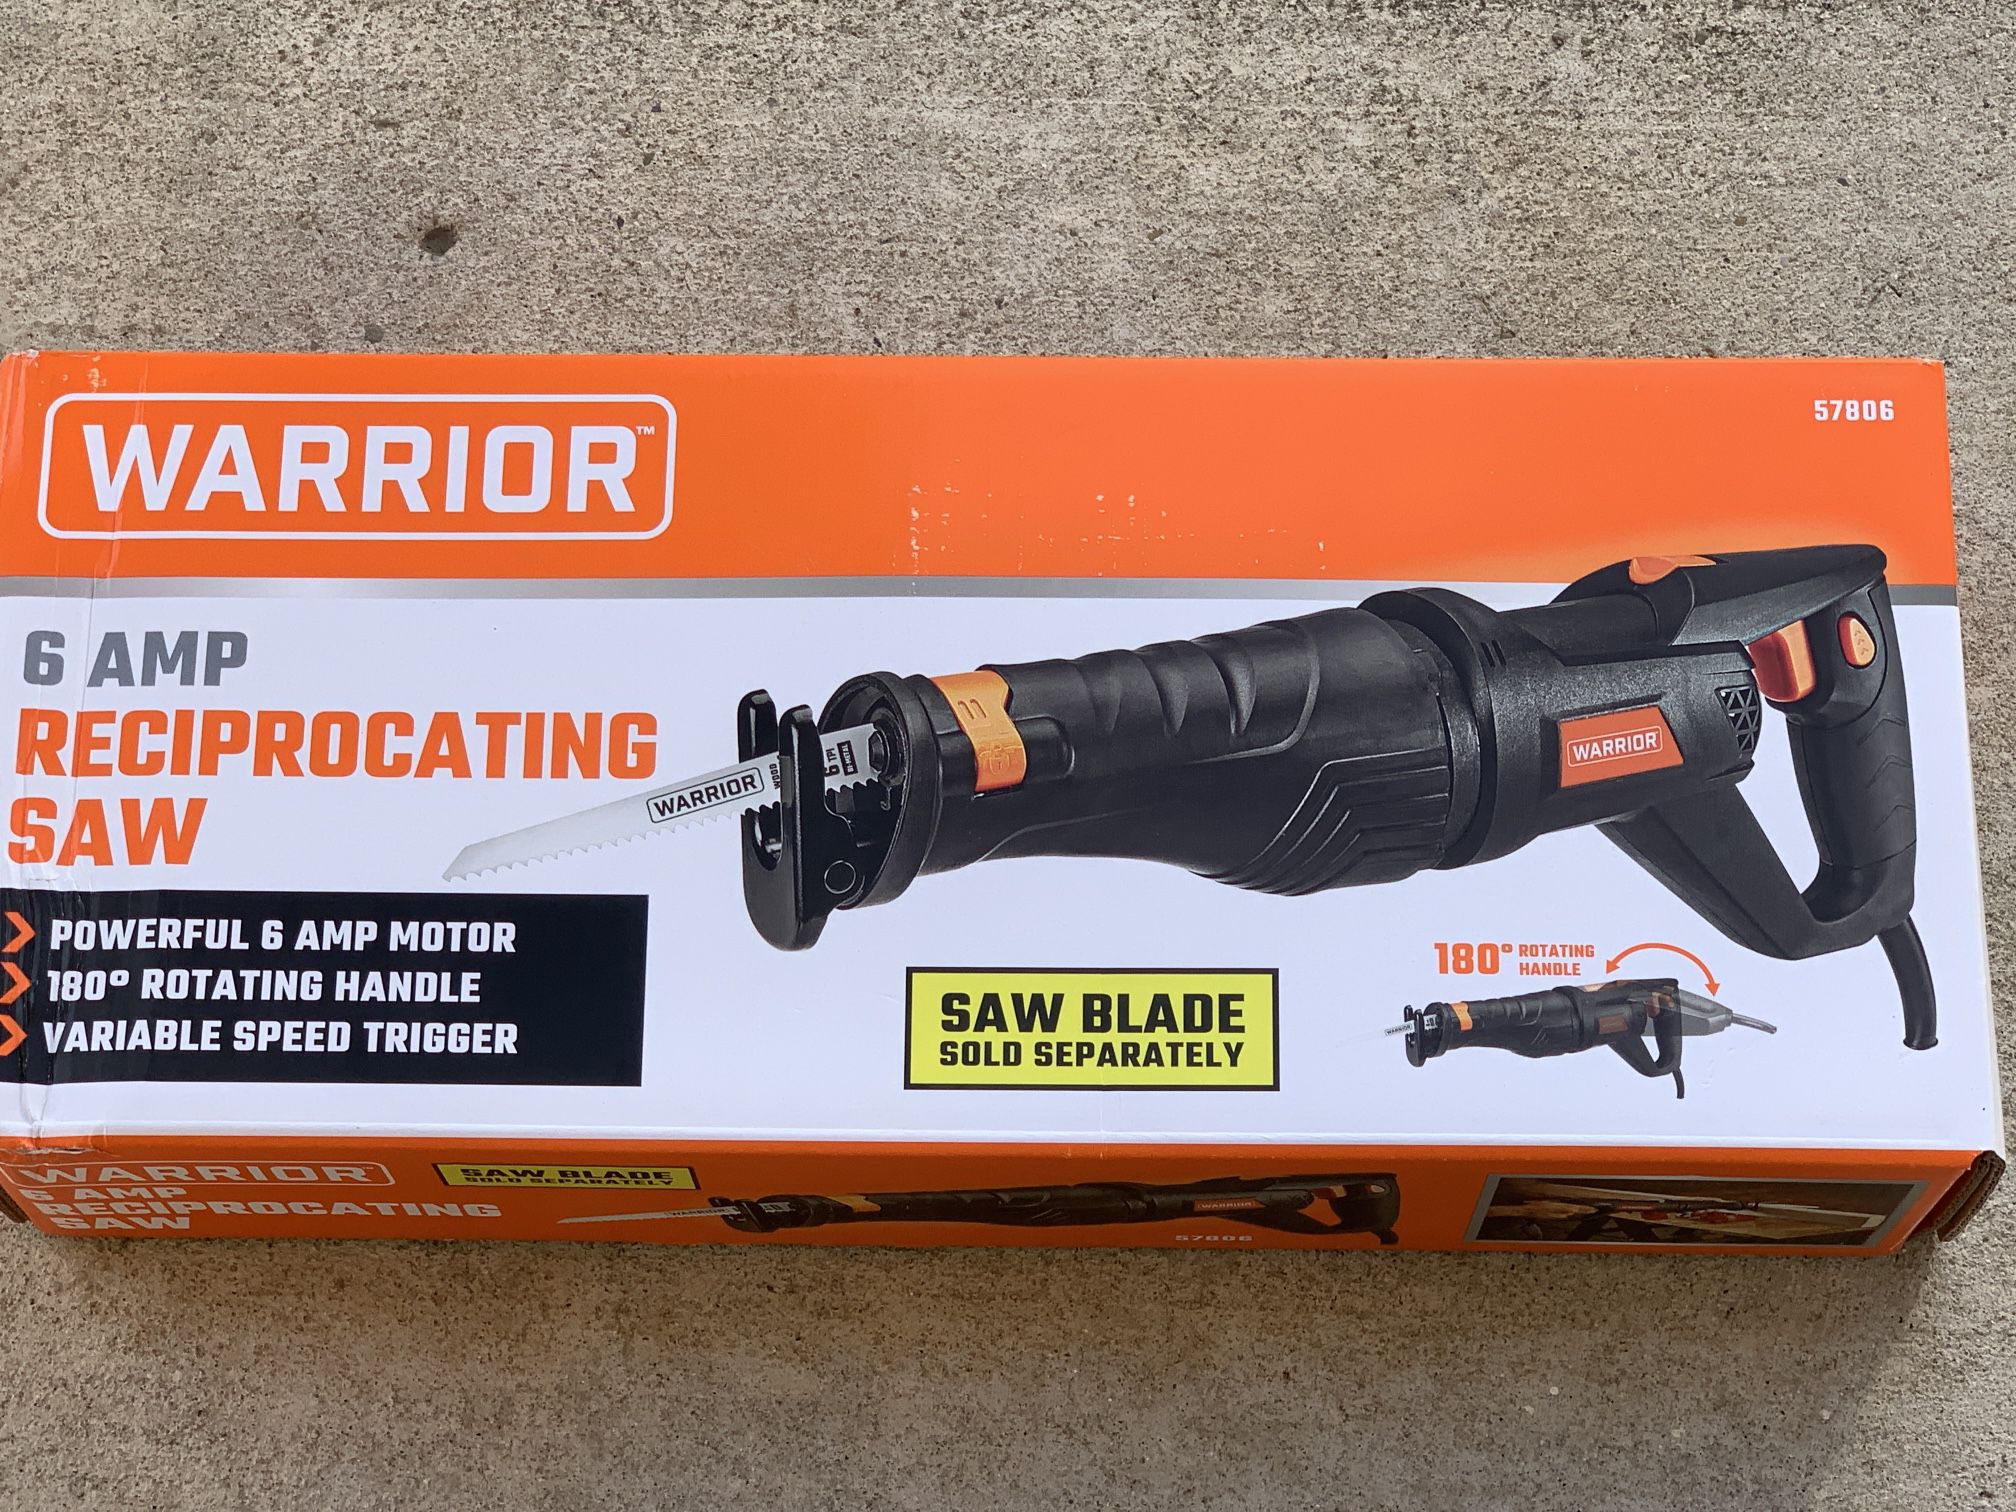 New Warrior Reciprocating Saw 180 Degree Rotating Handle Variable Spee